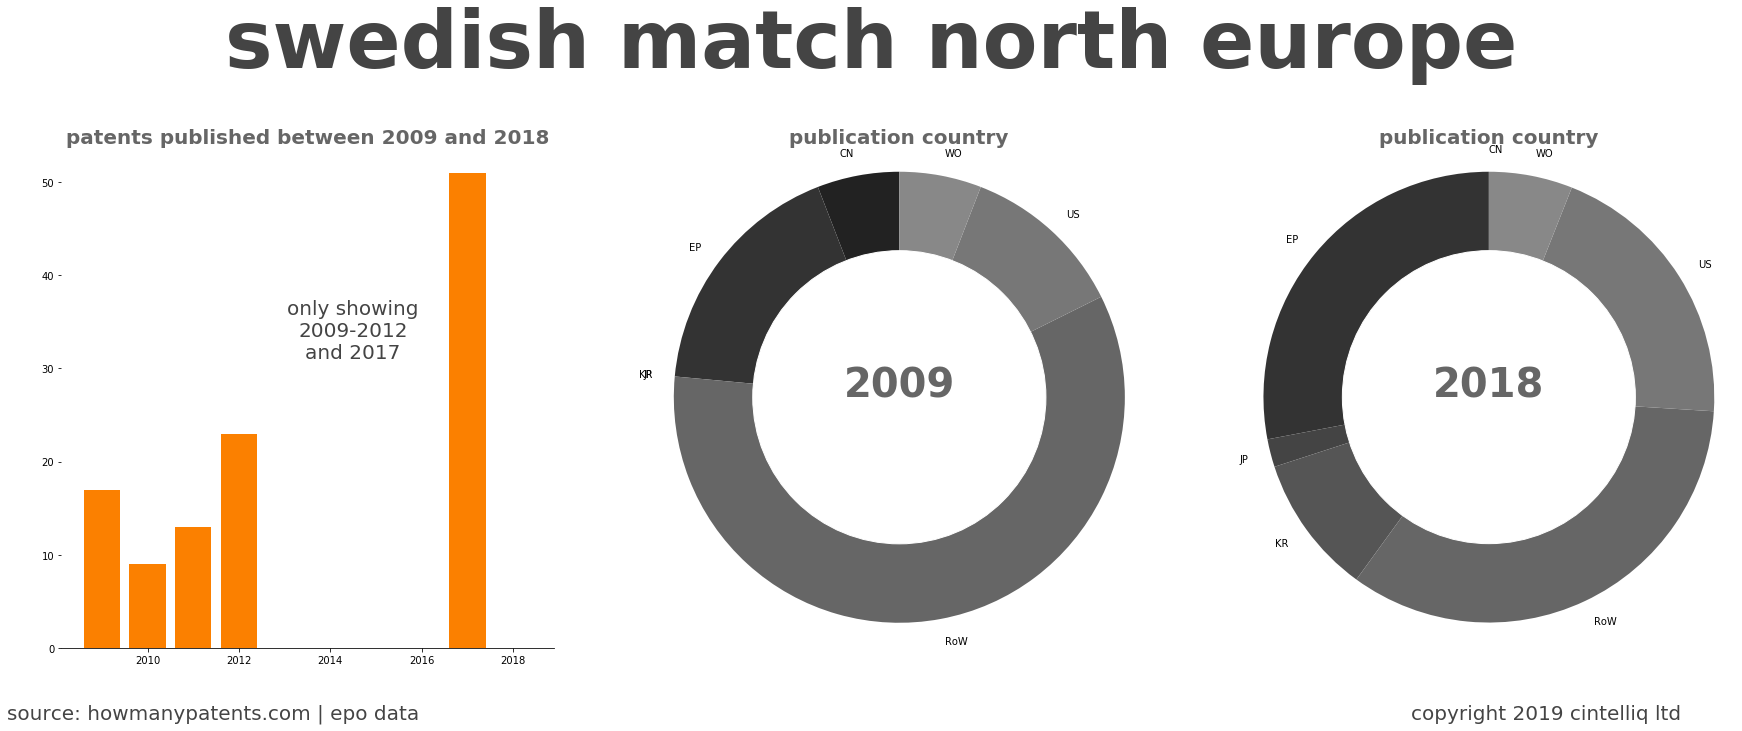 summary of patents for Swedish Match North Europe